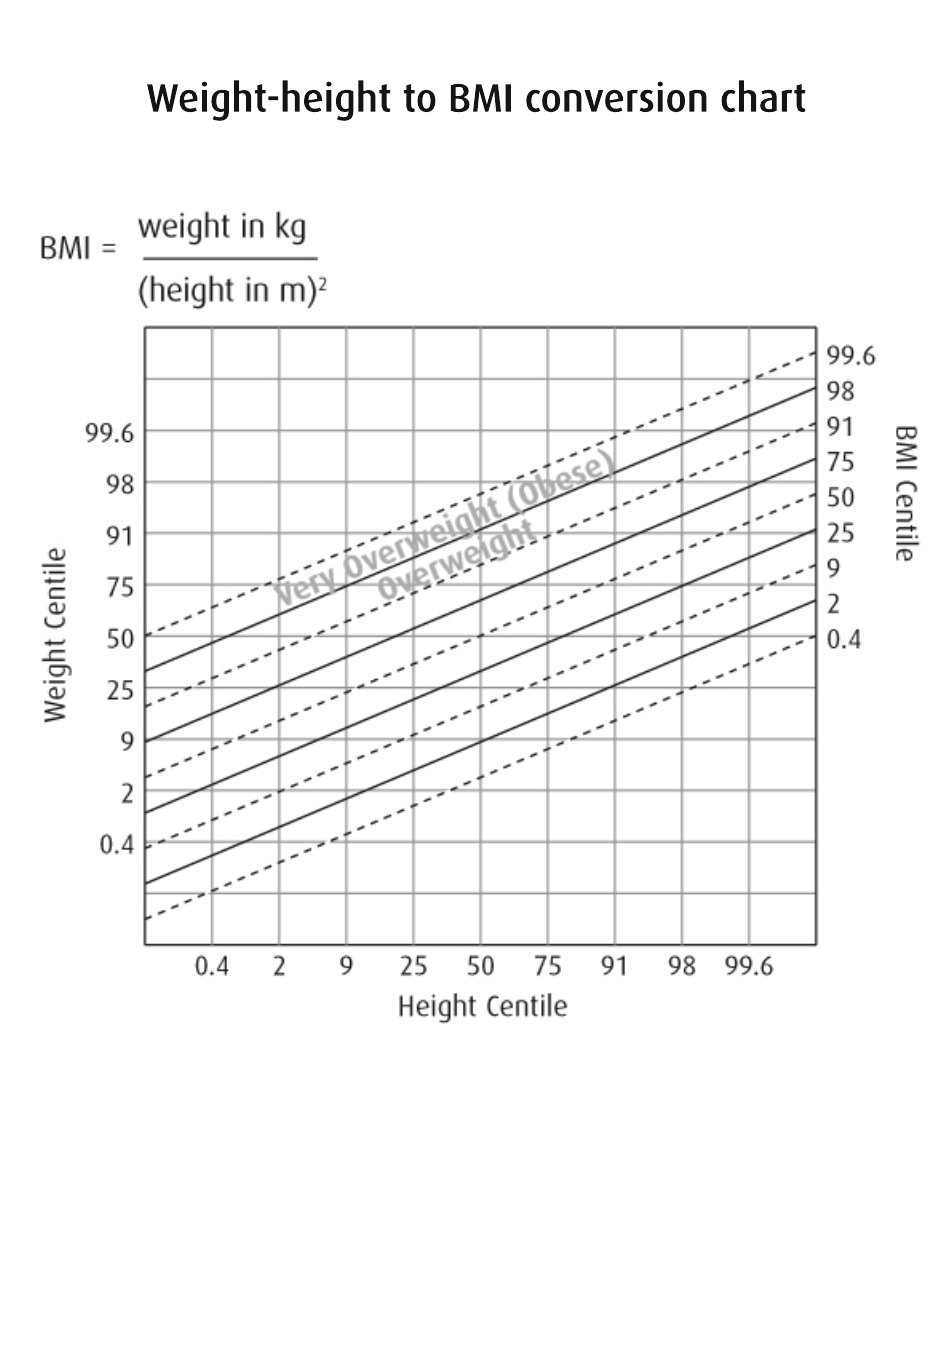 Weight-Height to BMI Conversion Chart - Sample Preview Image